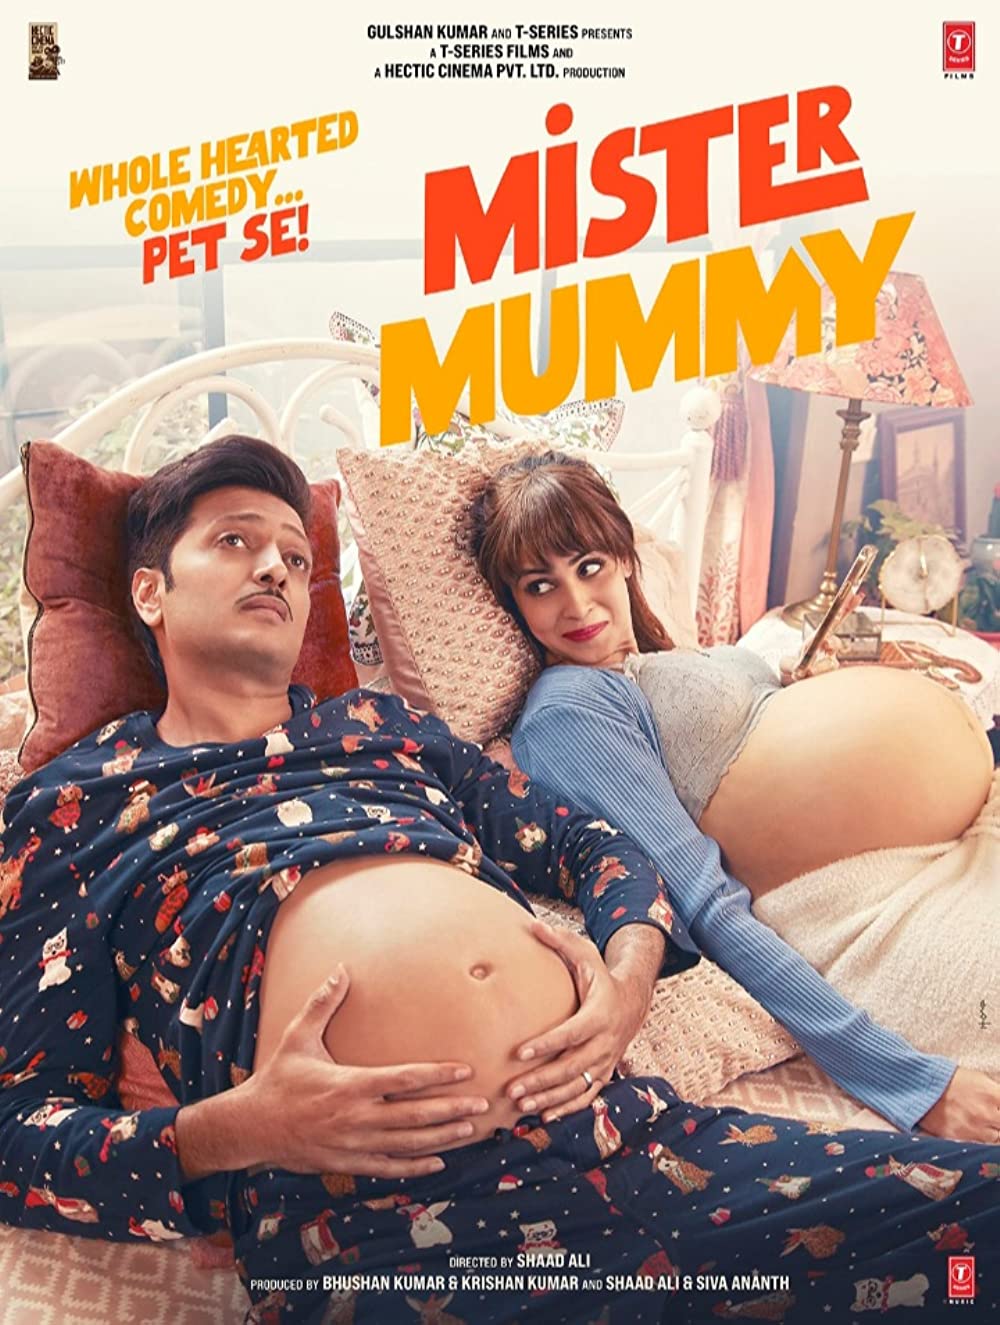 Mister Mummy Movie Review | Mister Mummy Filmy Rating 2022